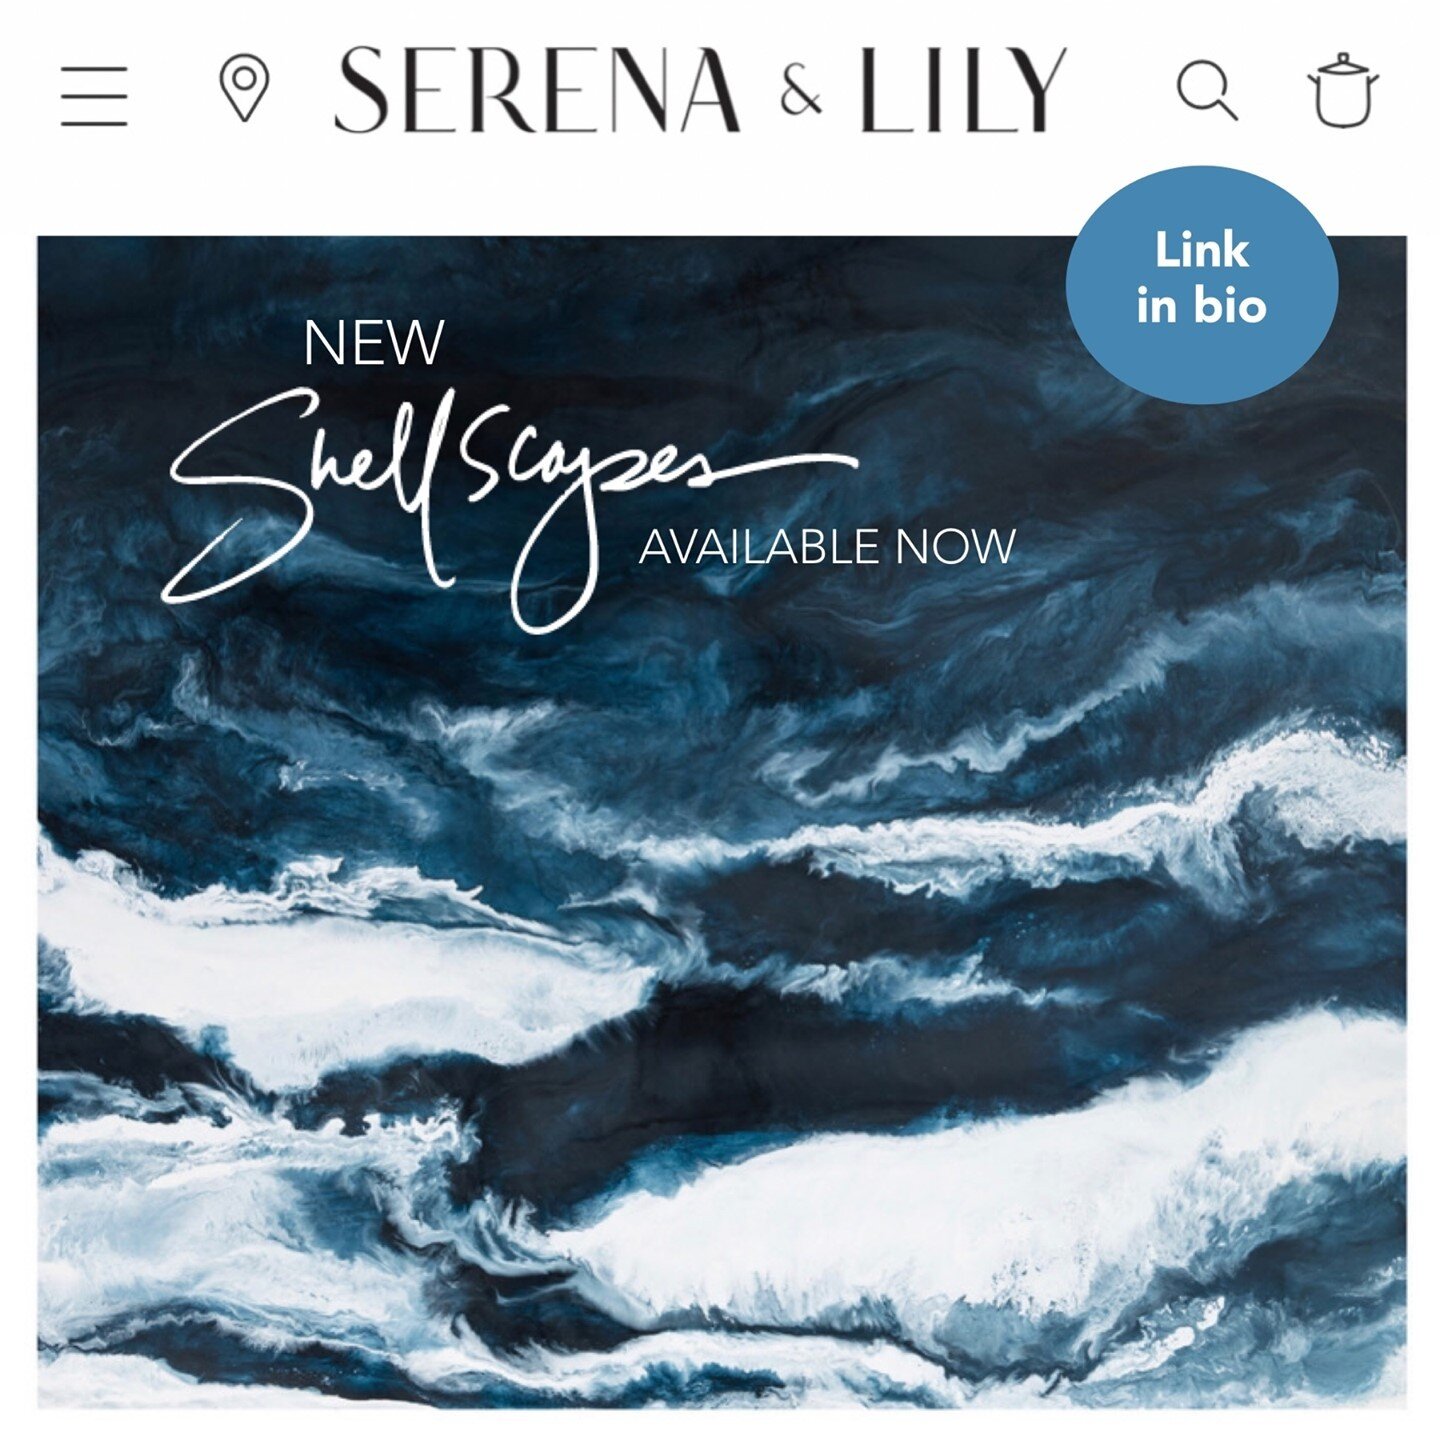 New Shellscapes have launched on Serena &amp; Lily's website! There are several new small and medium paintings alongside the larger options now so there is something for everyone. &quot;Storm Surge&quot; 20x20 is pictured here.⁠
⁠
If you are interest